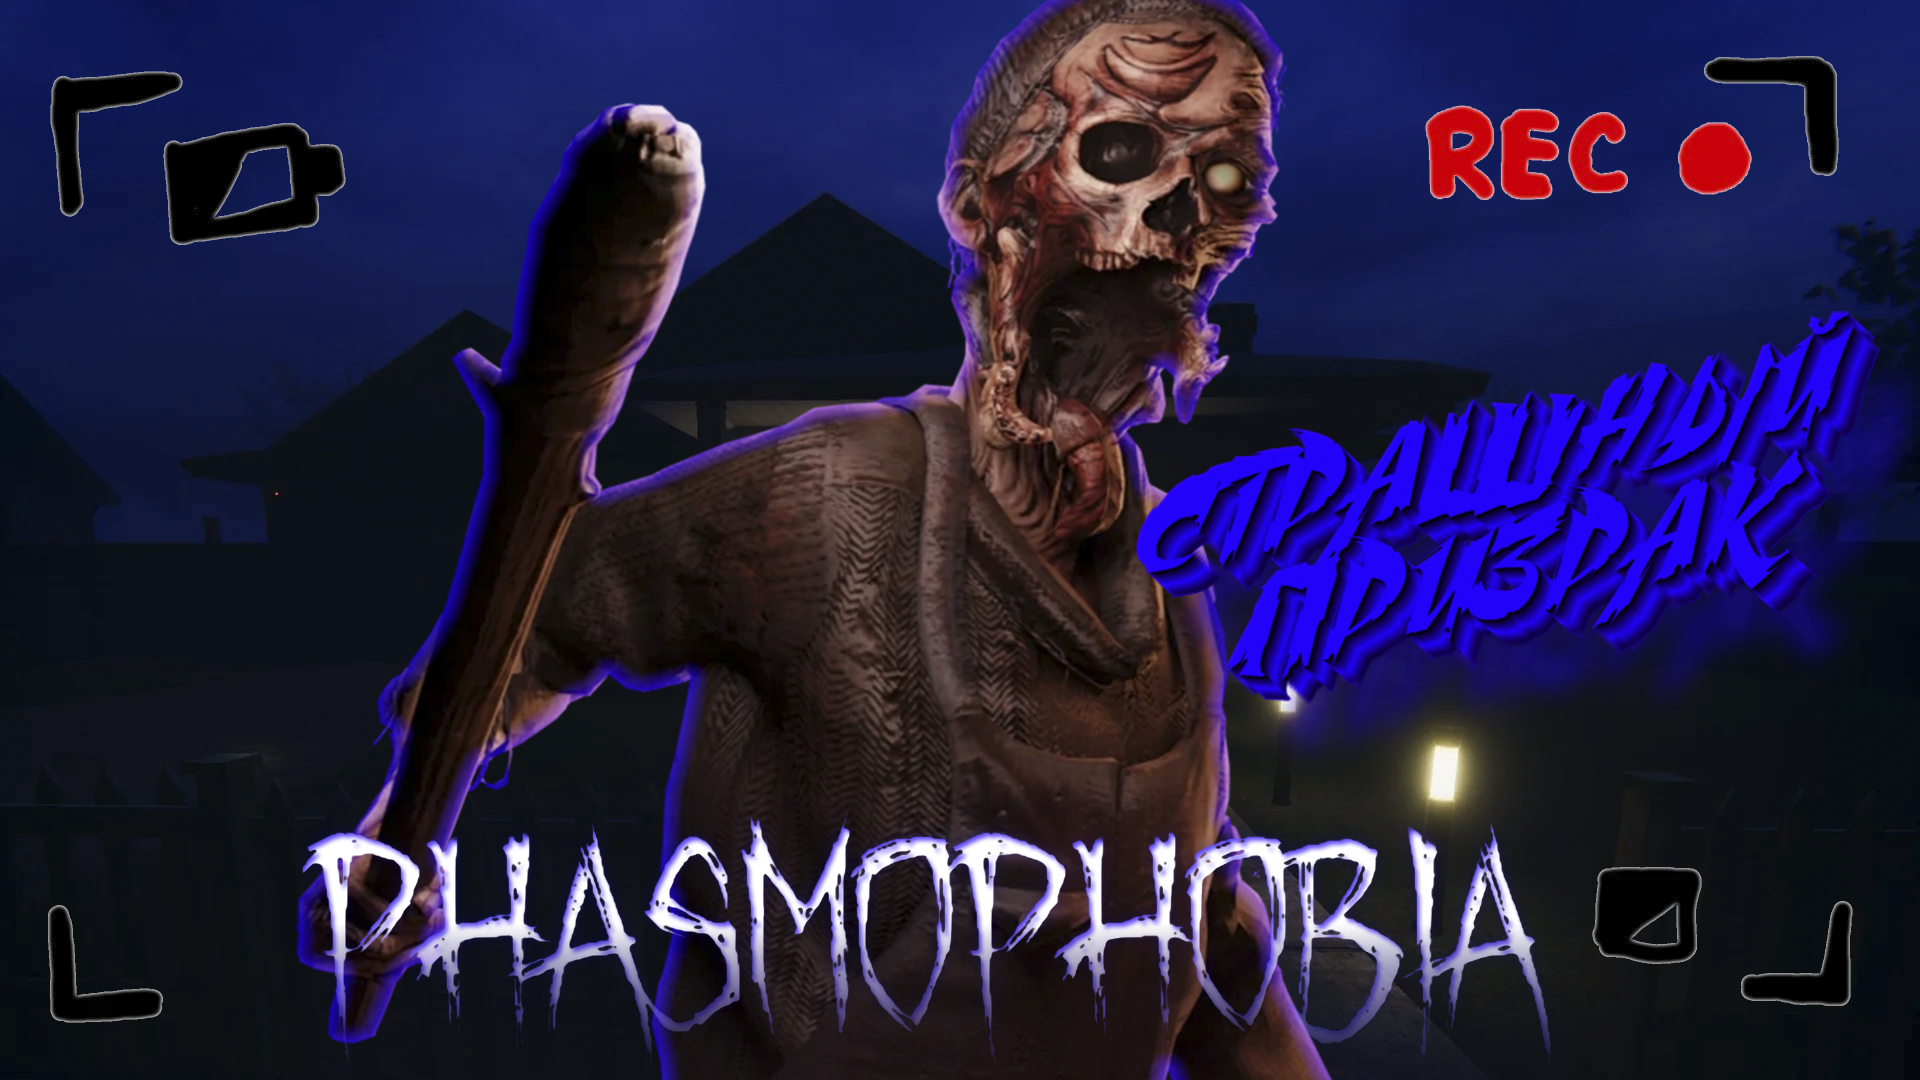 Ghost exile vs phasmophobia фото 77